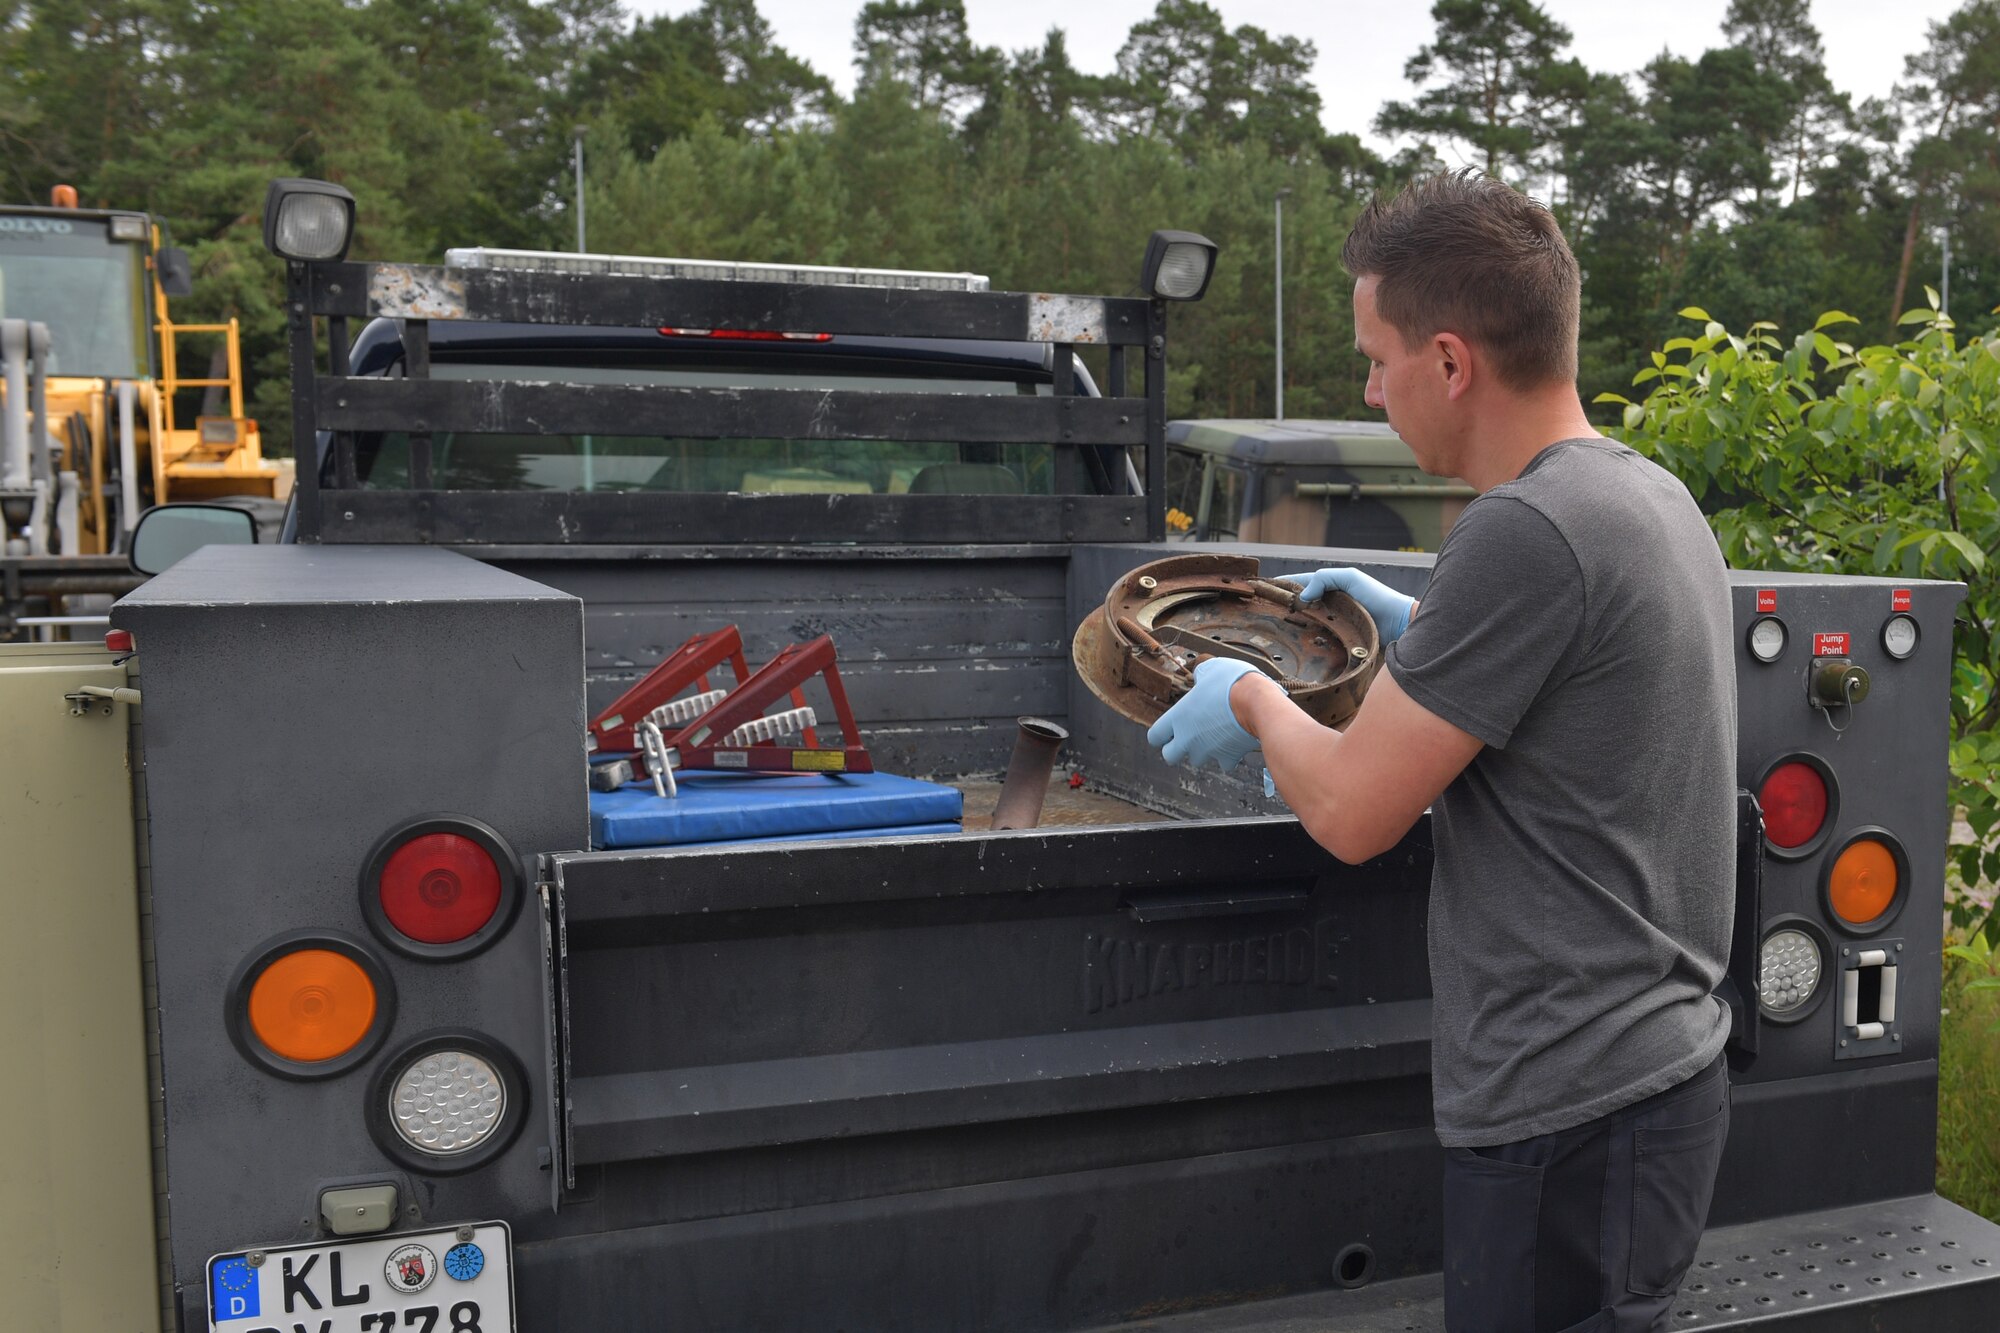 A man placing a brake assembly in a truck bed.